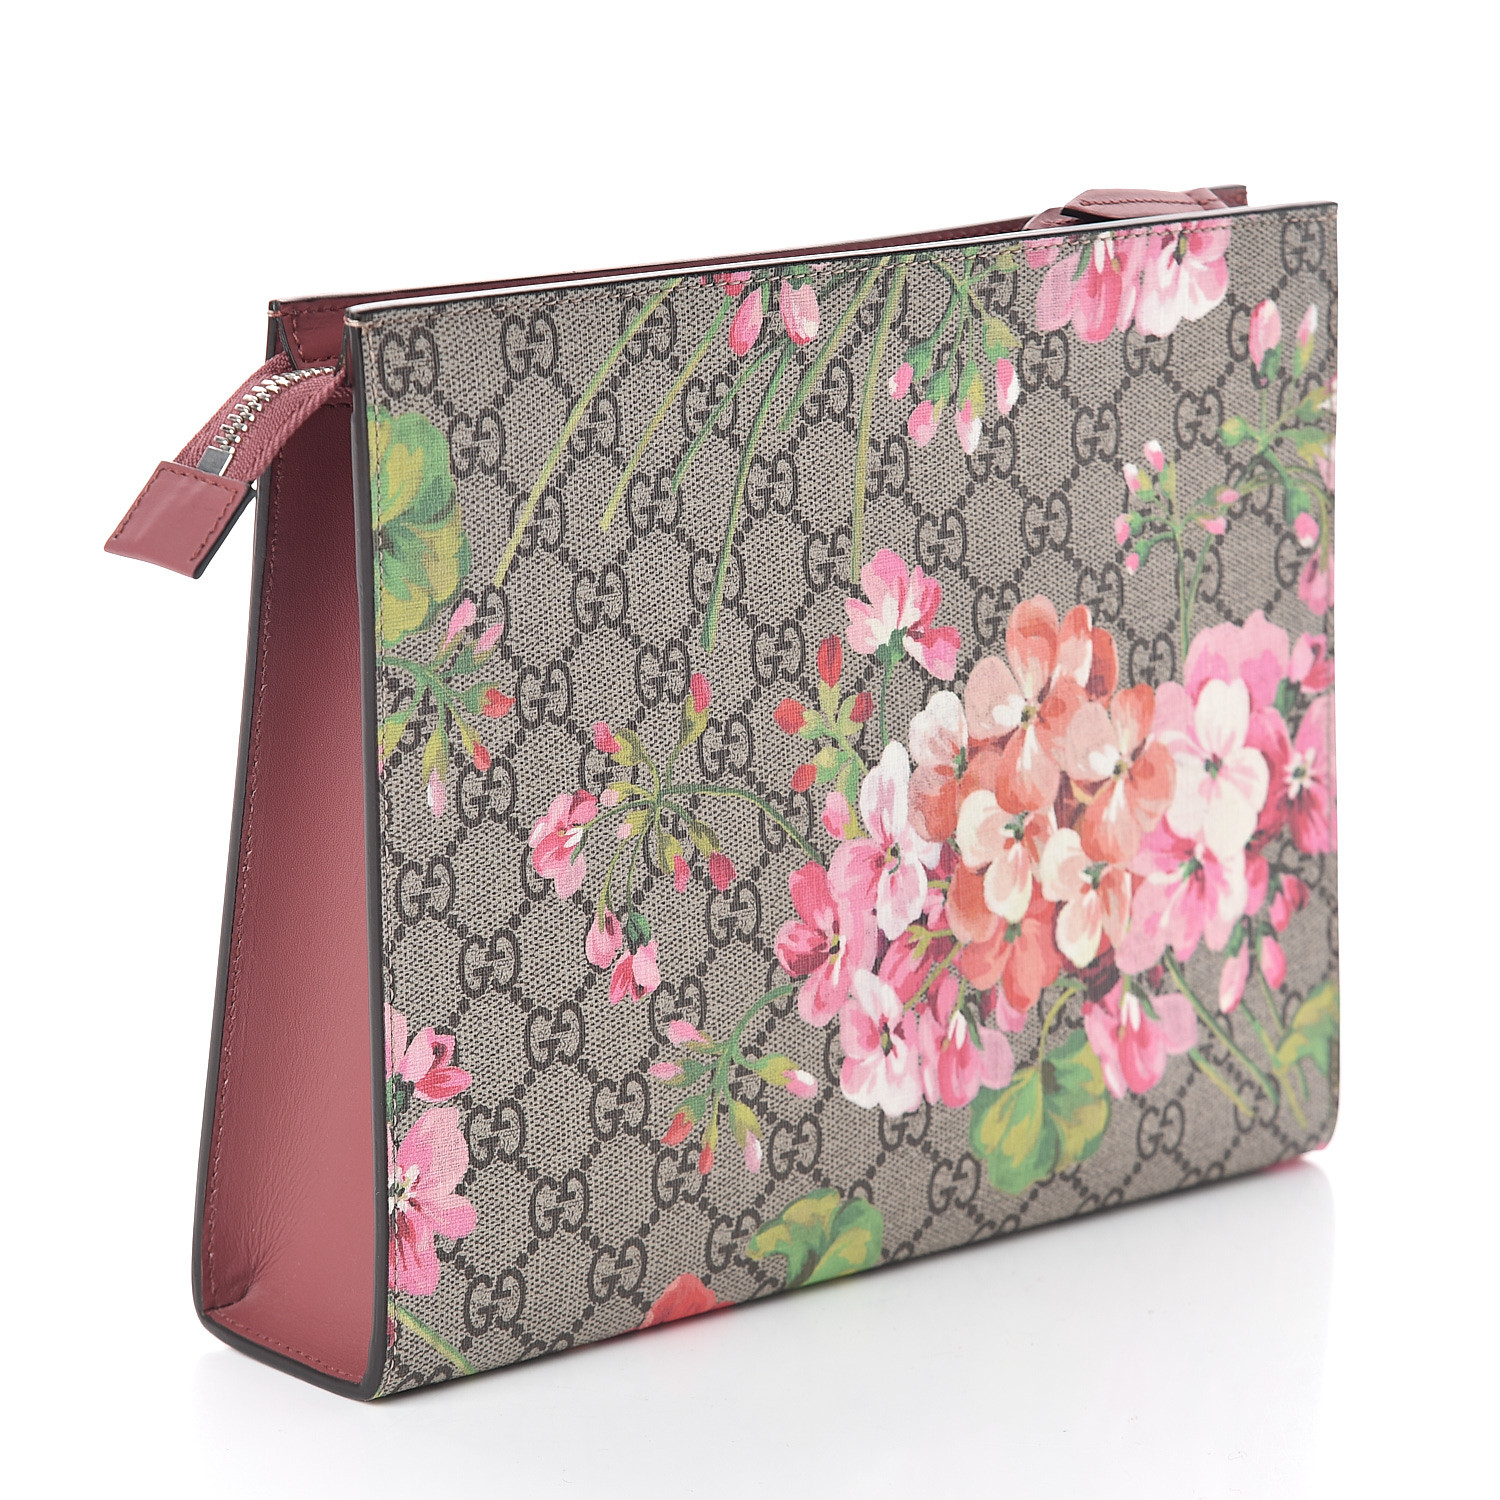 gucci blooms cosmetic case